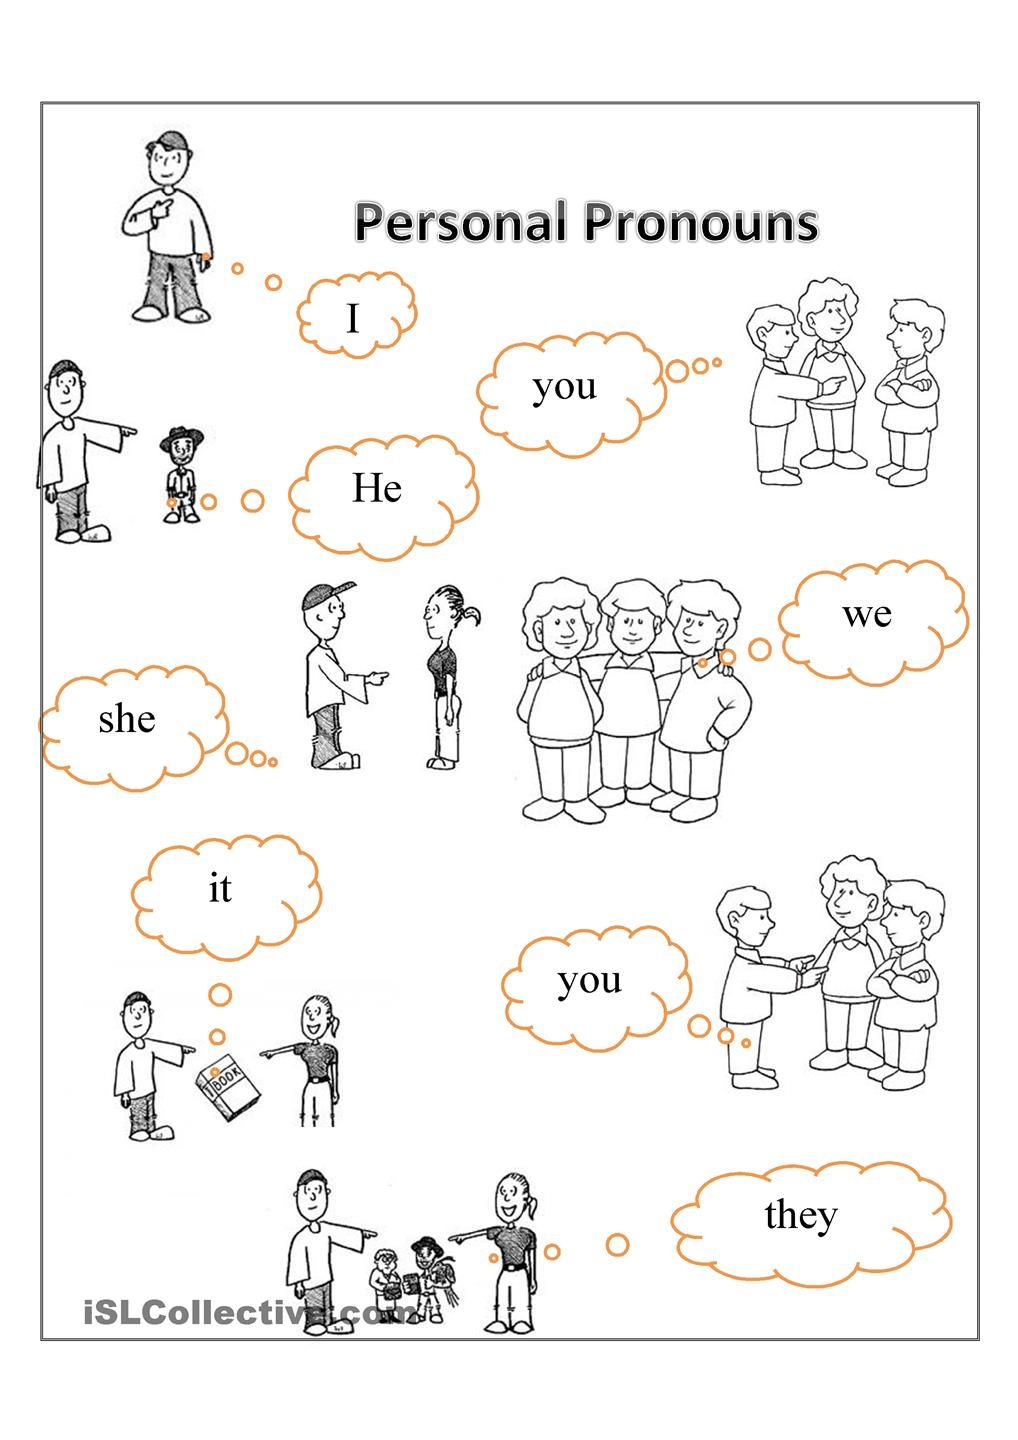 13-best-images-of-intensive-pronouns-worksheets-reflexive-pronouns-worksheet-reflexive-and